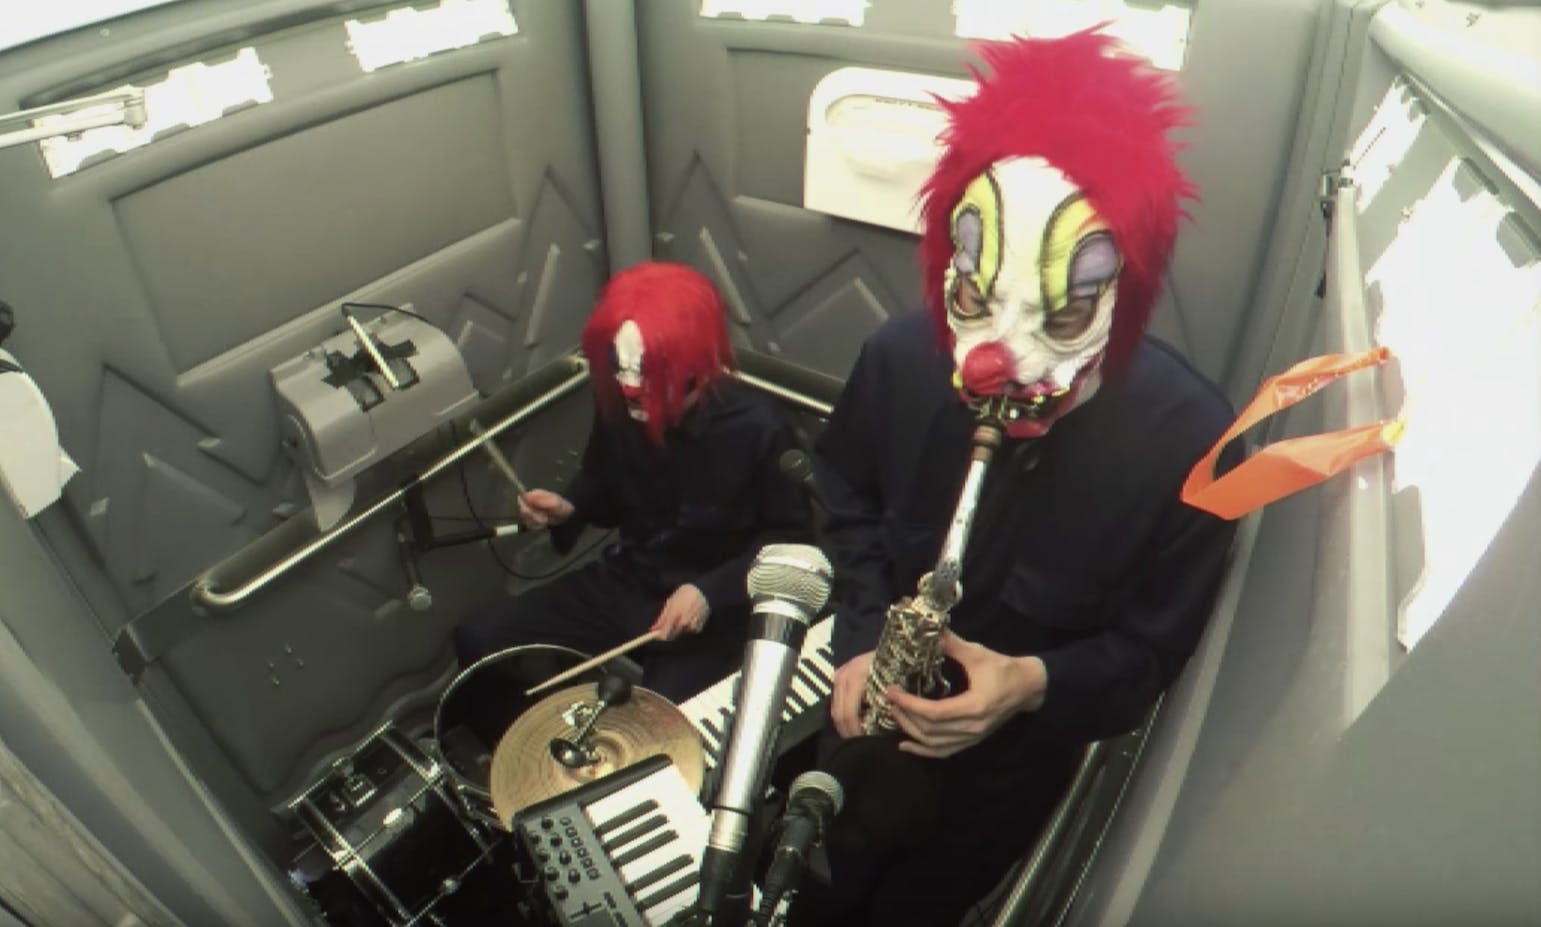 Two Clowns Playing Grindcore, Drum And Bass And Jazz In A Porta-Potty